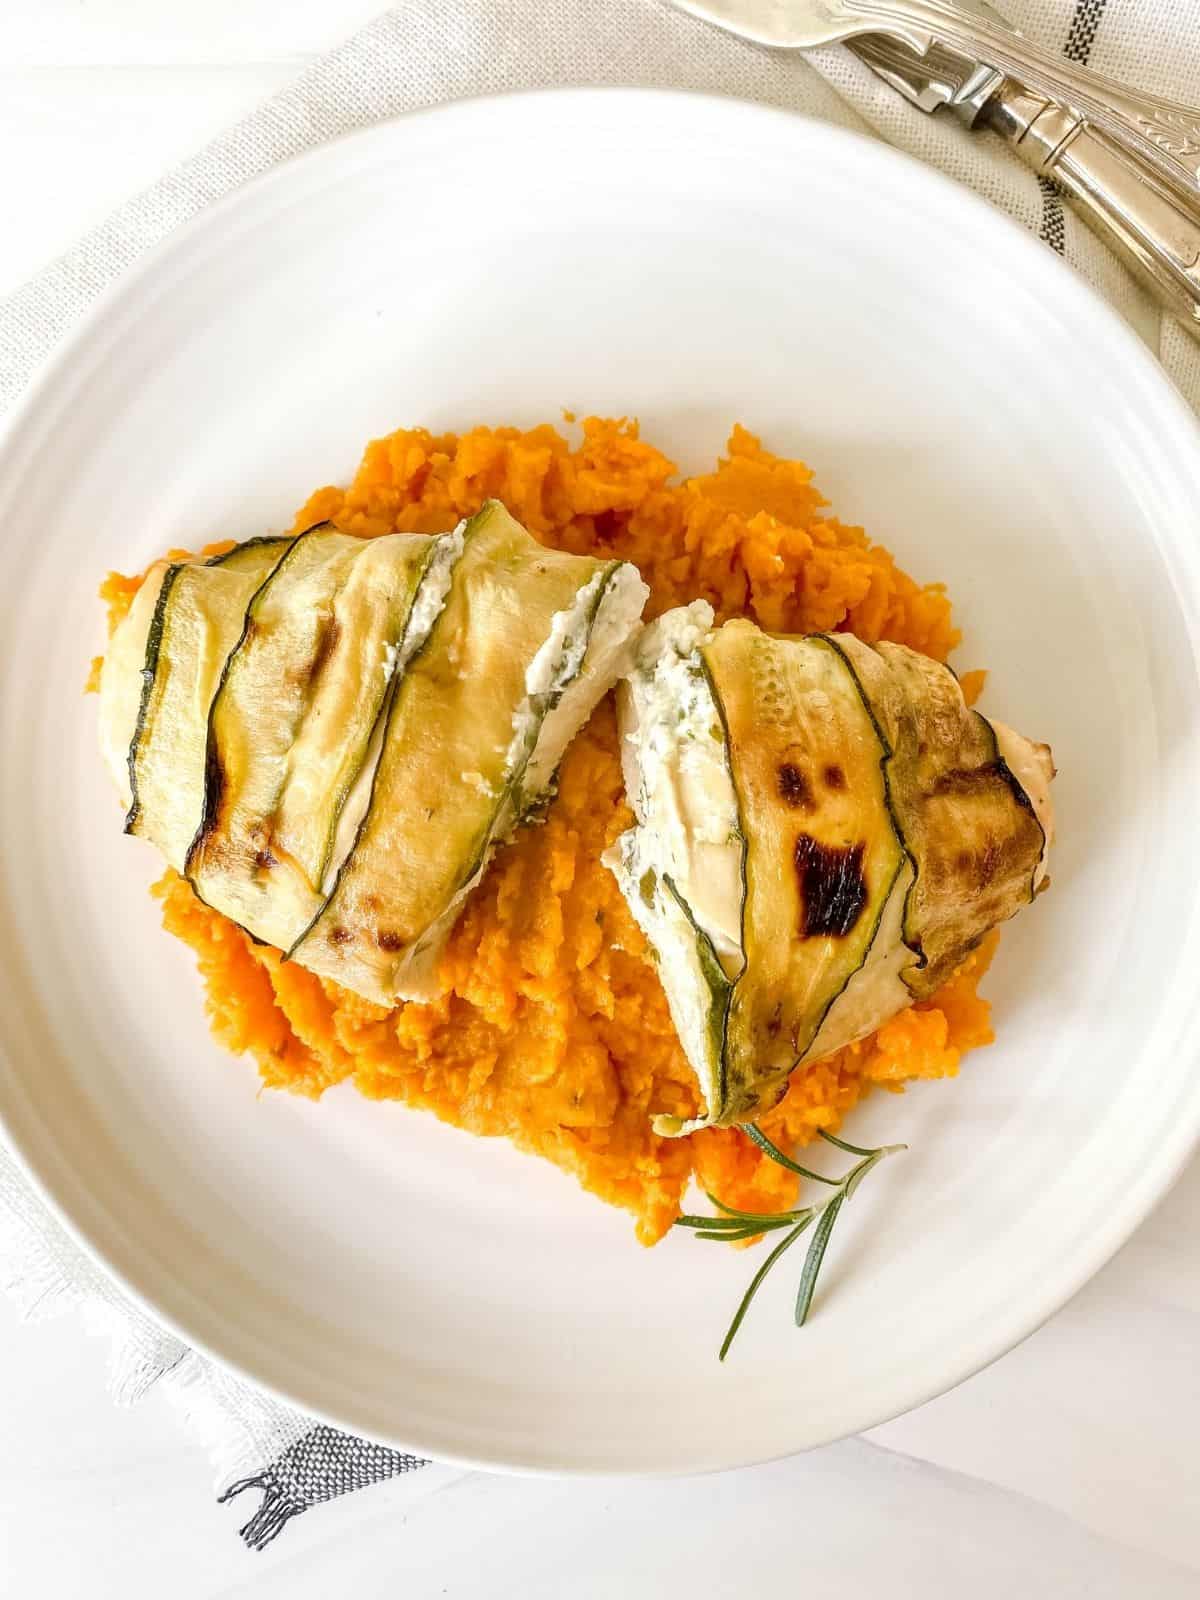 two pieces of cream cheese stuffed chicken on a bed of sweet potato mash on a white plate.